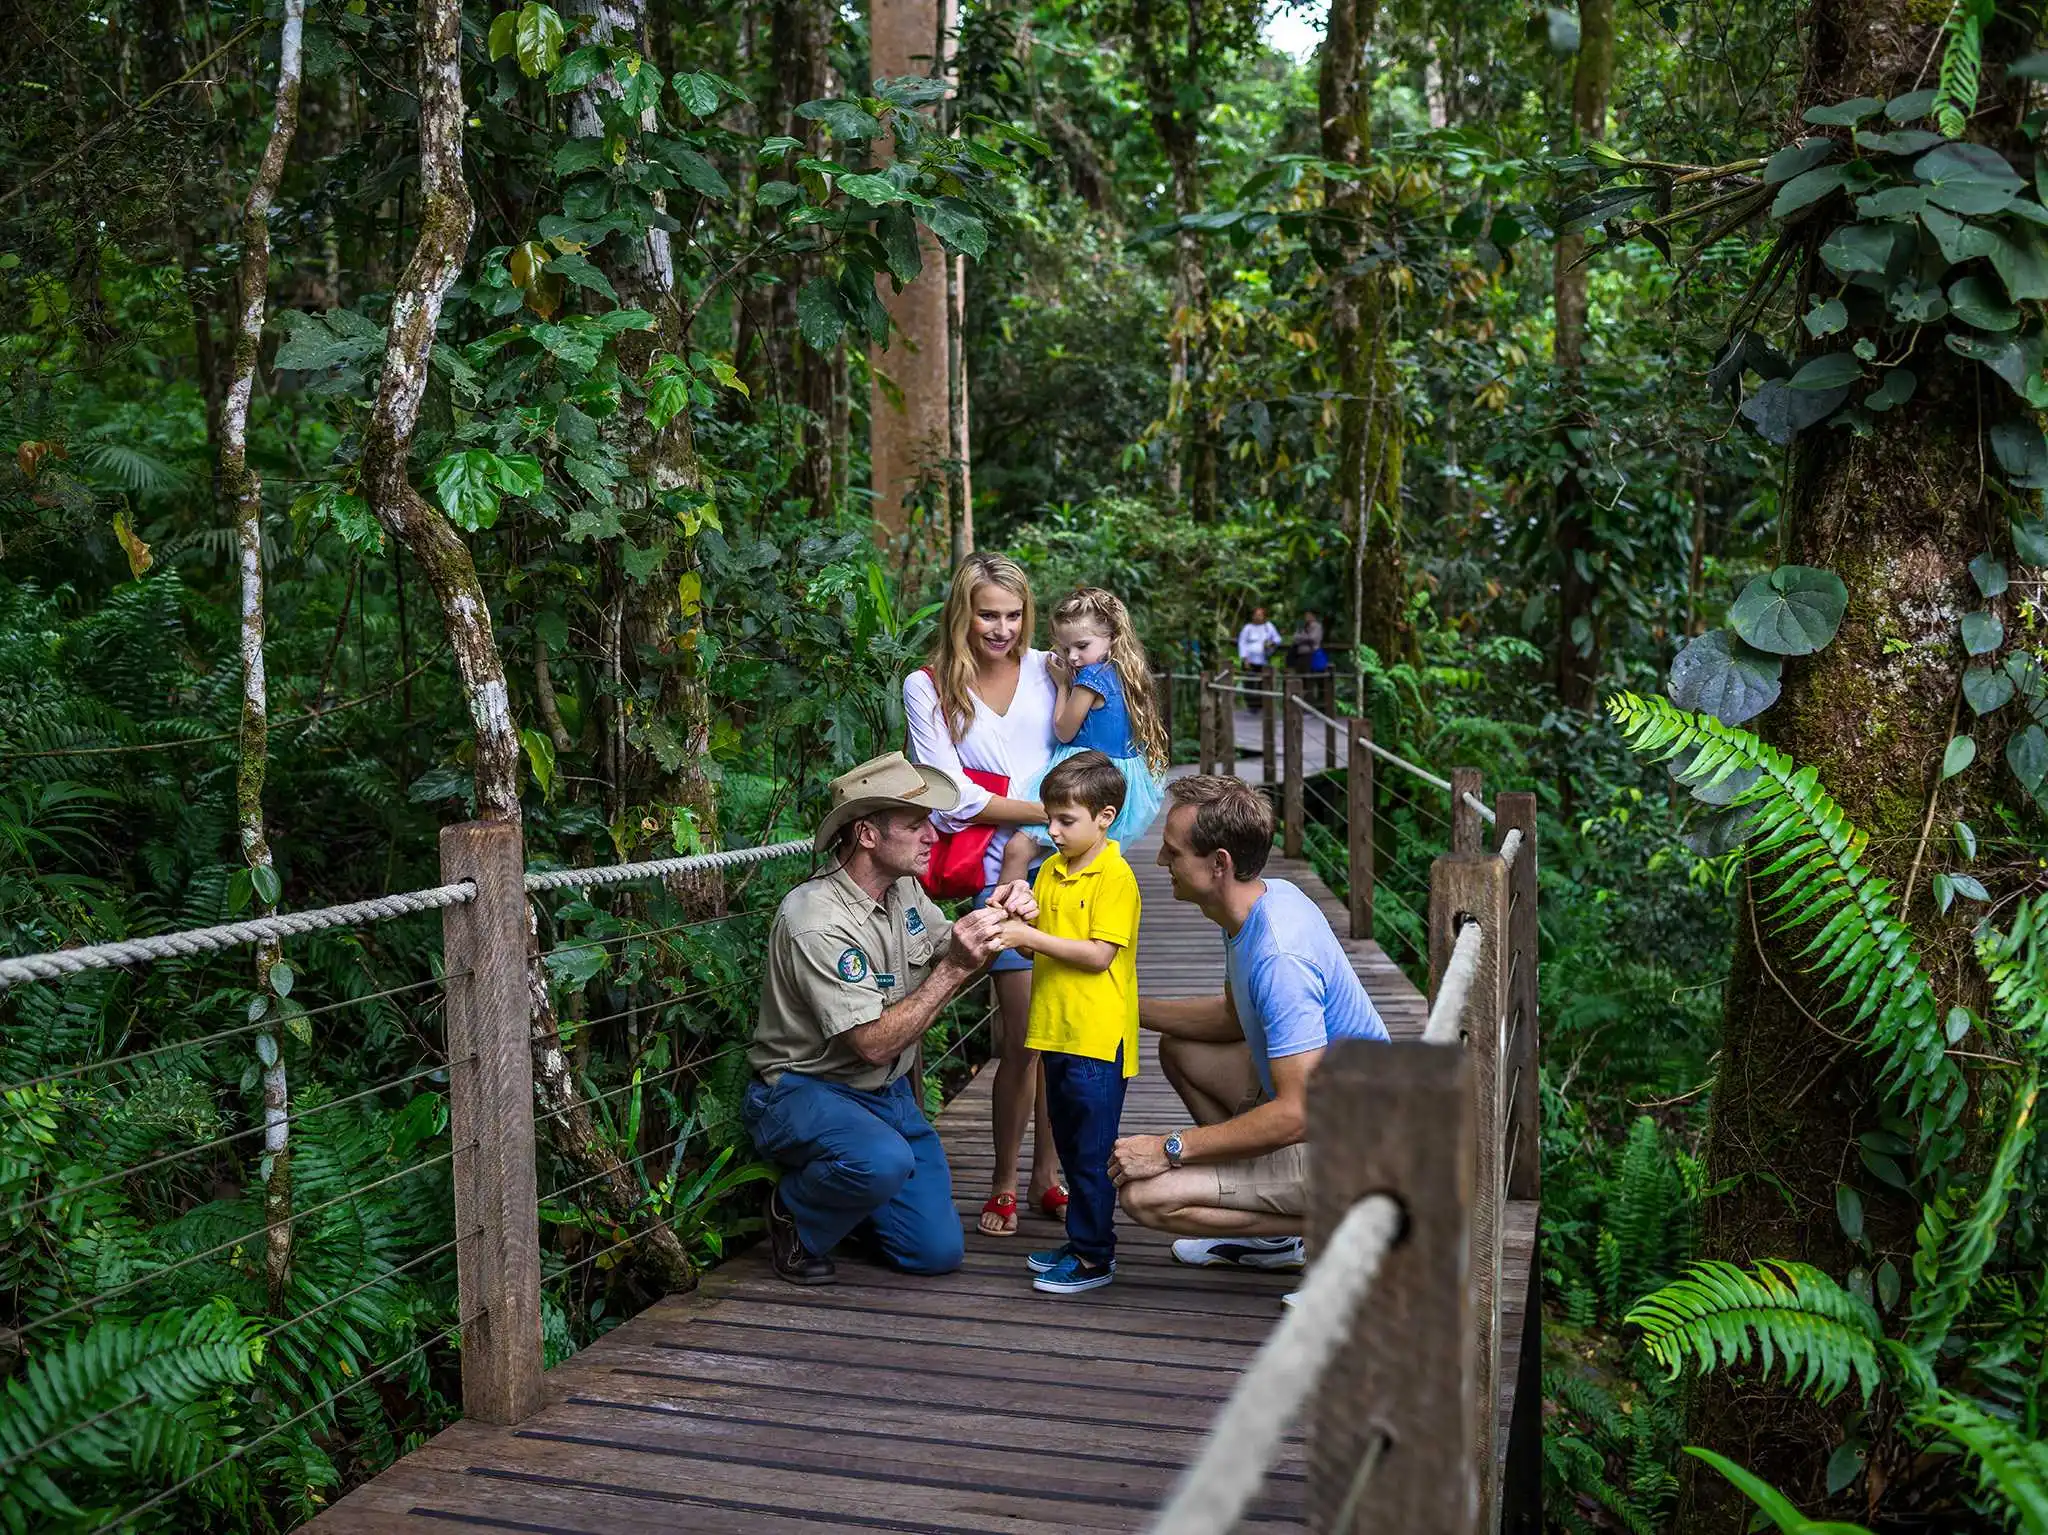 A ranger kneels on a rainforest boardwalk to talk to a small child and family